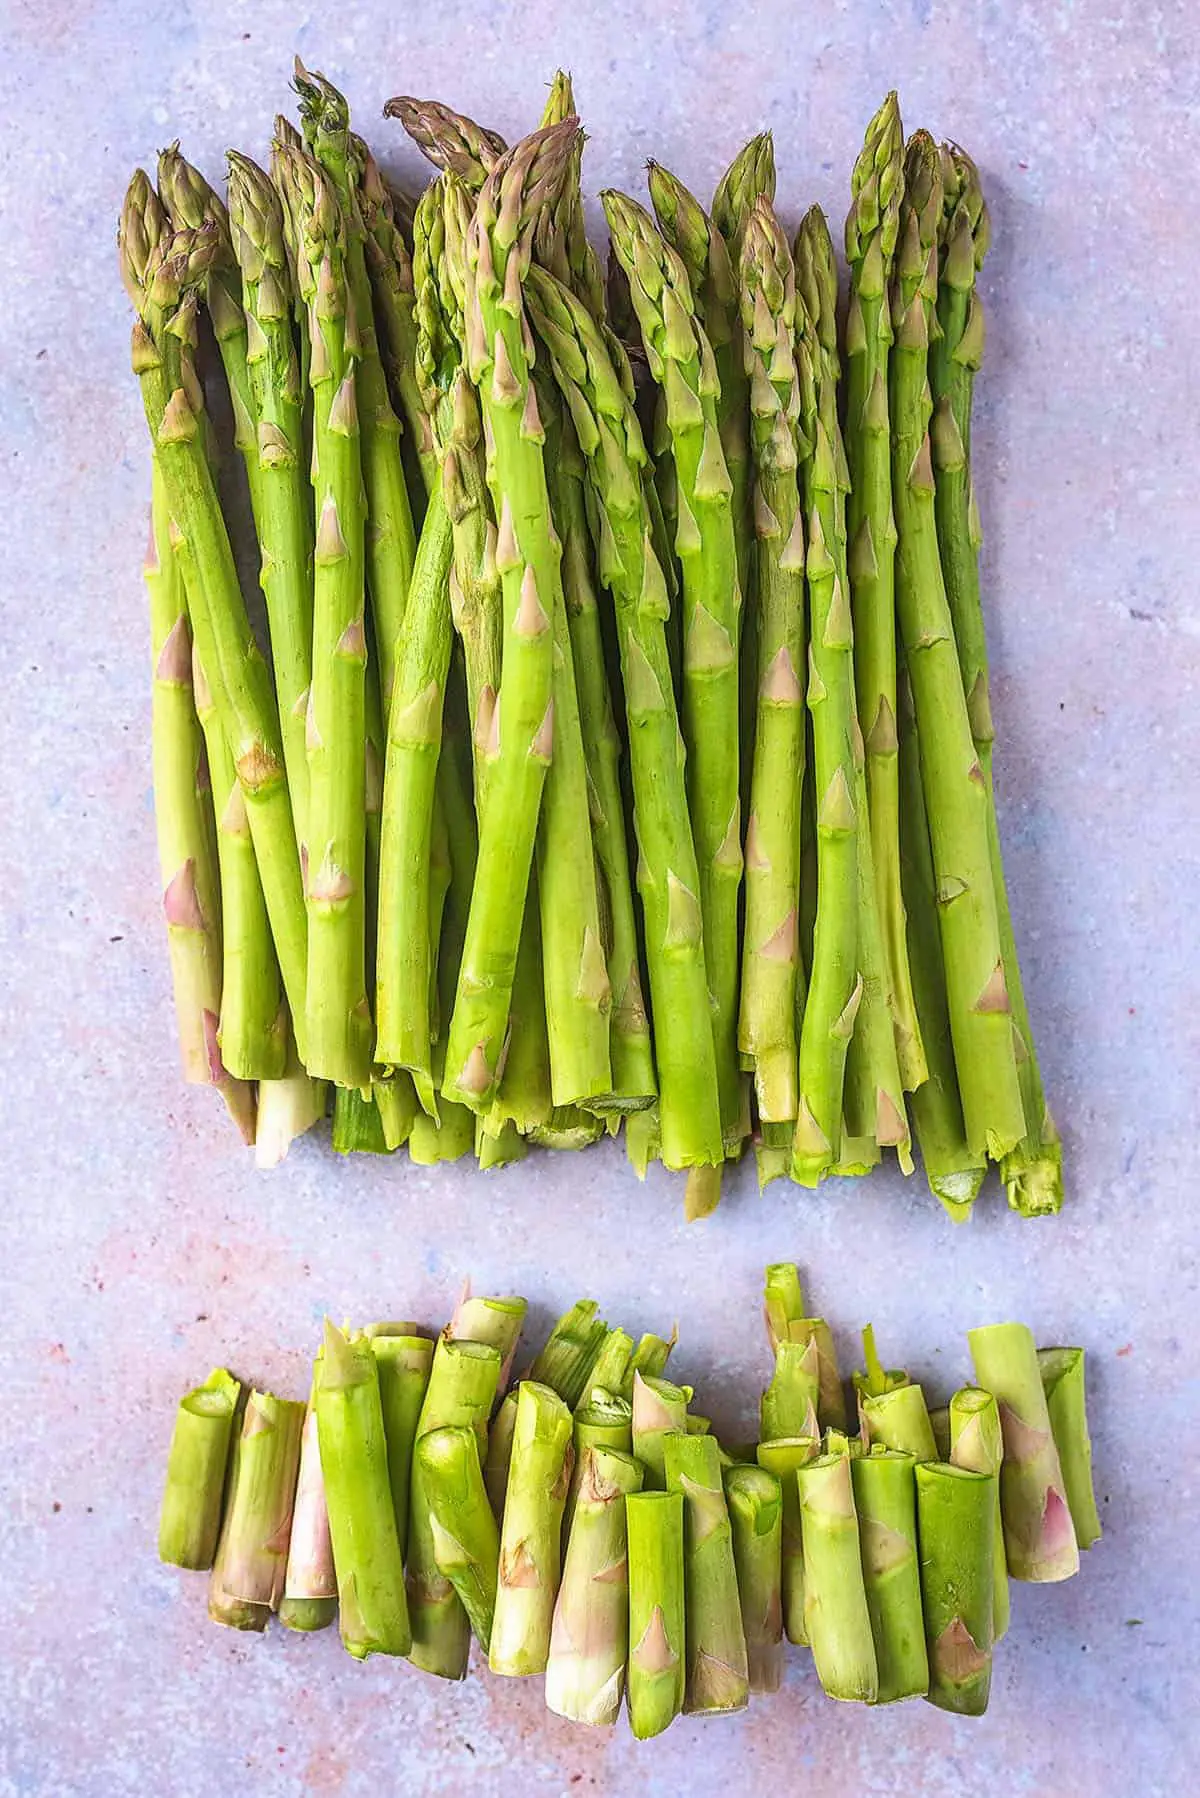 A pile of asparagus with all their woody ends snapped off.